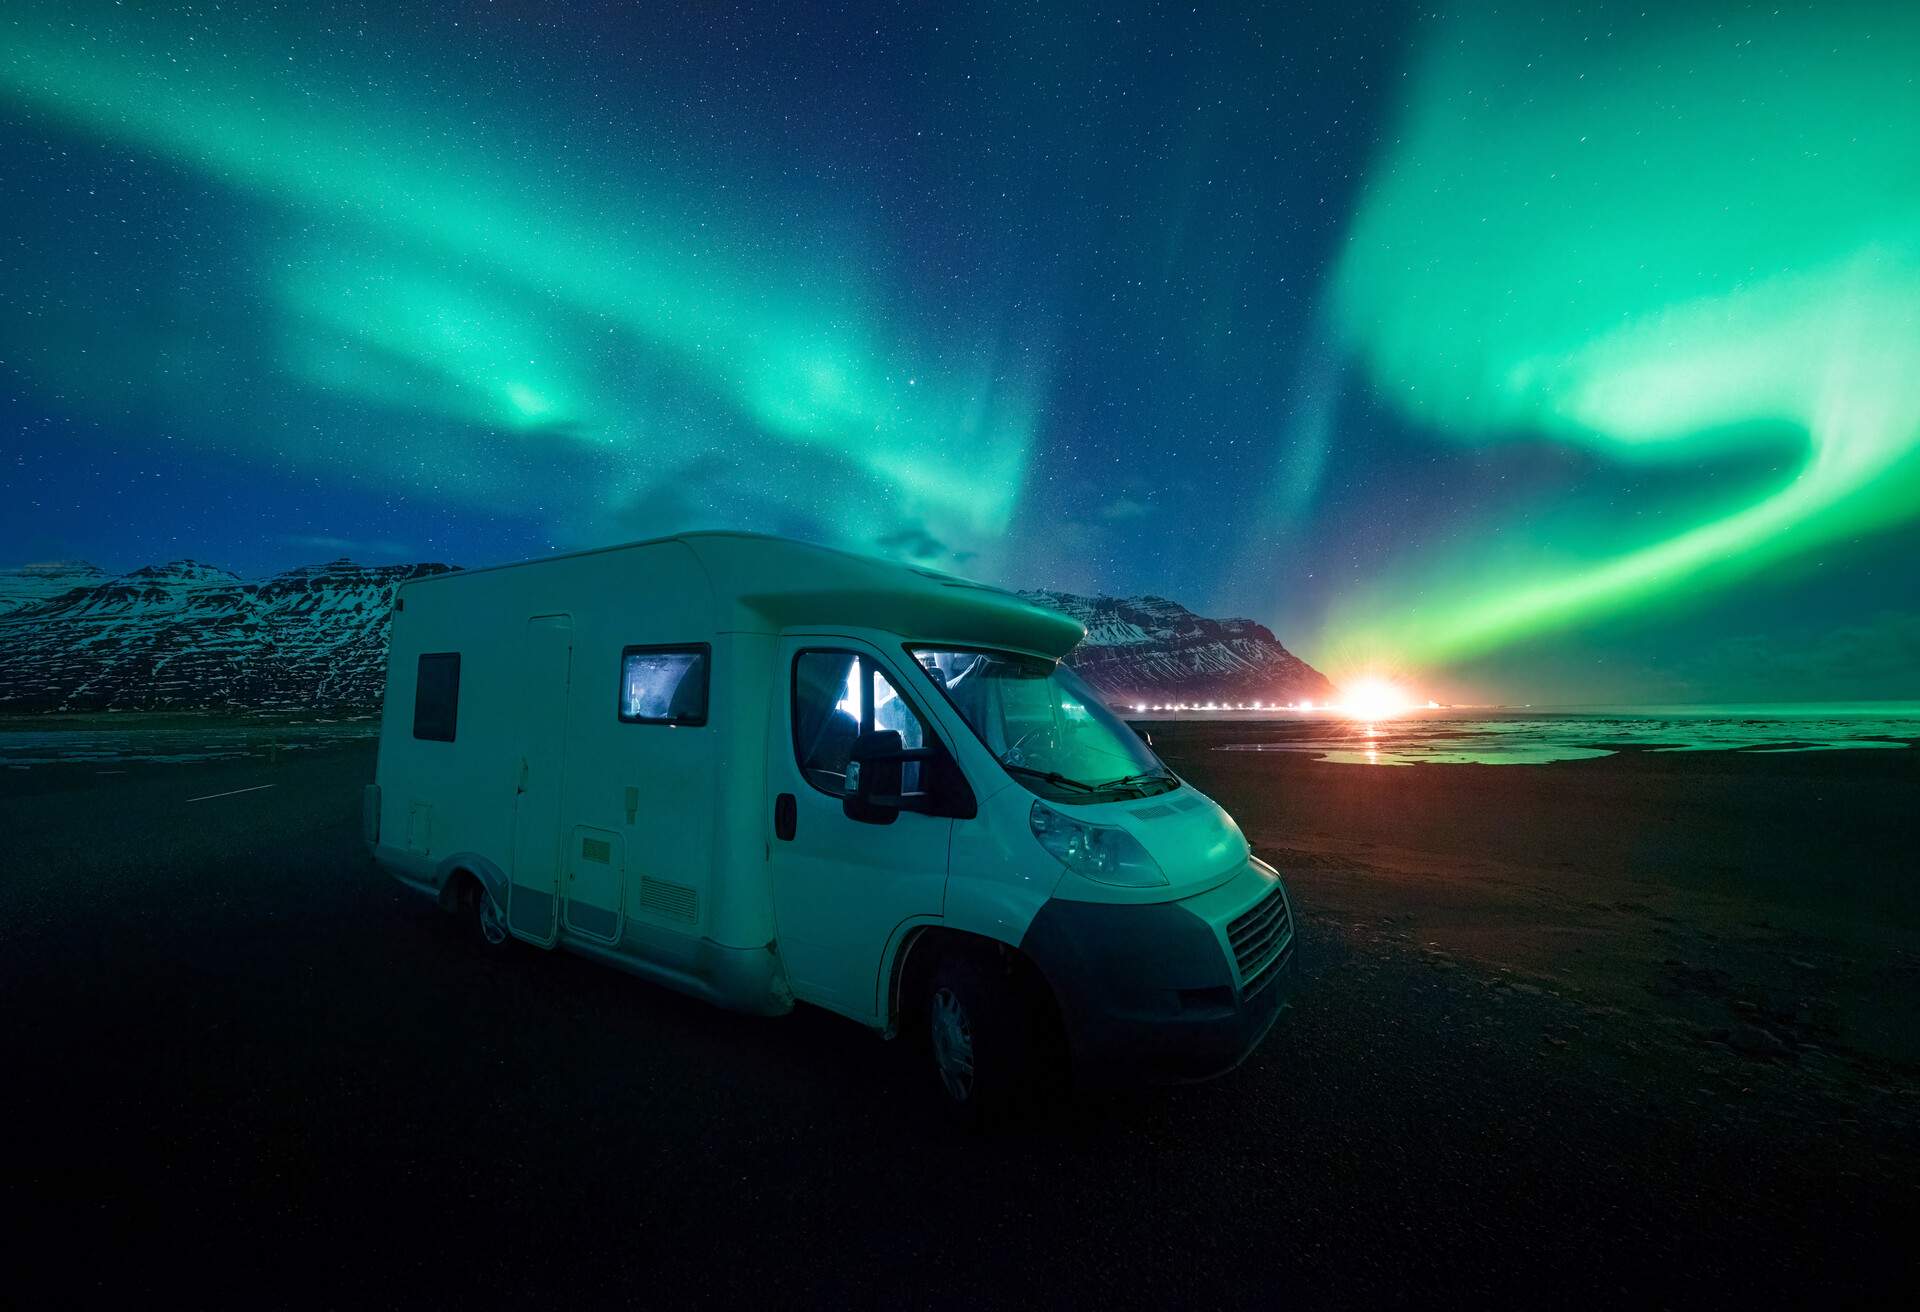 Aurora hunter with motorhome for mobility in the dark night sky under the spectacular celestial lights Aurora Borealis 